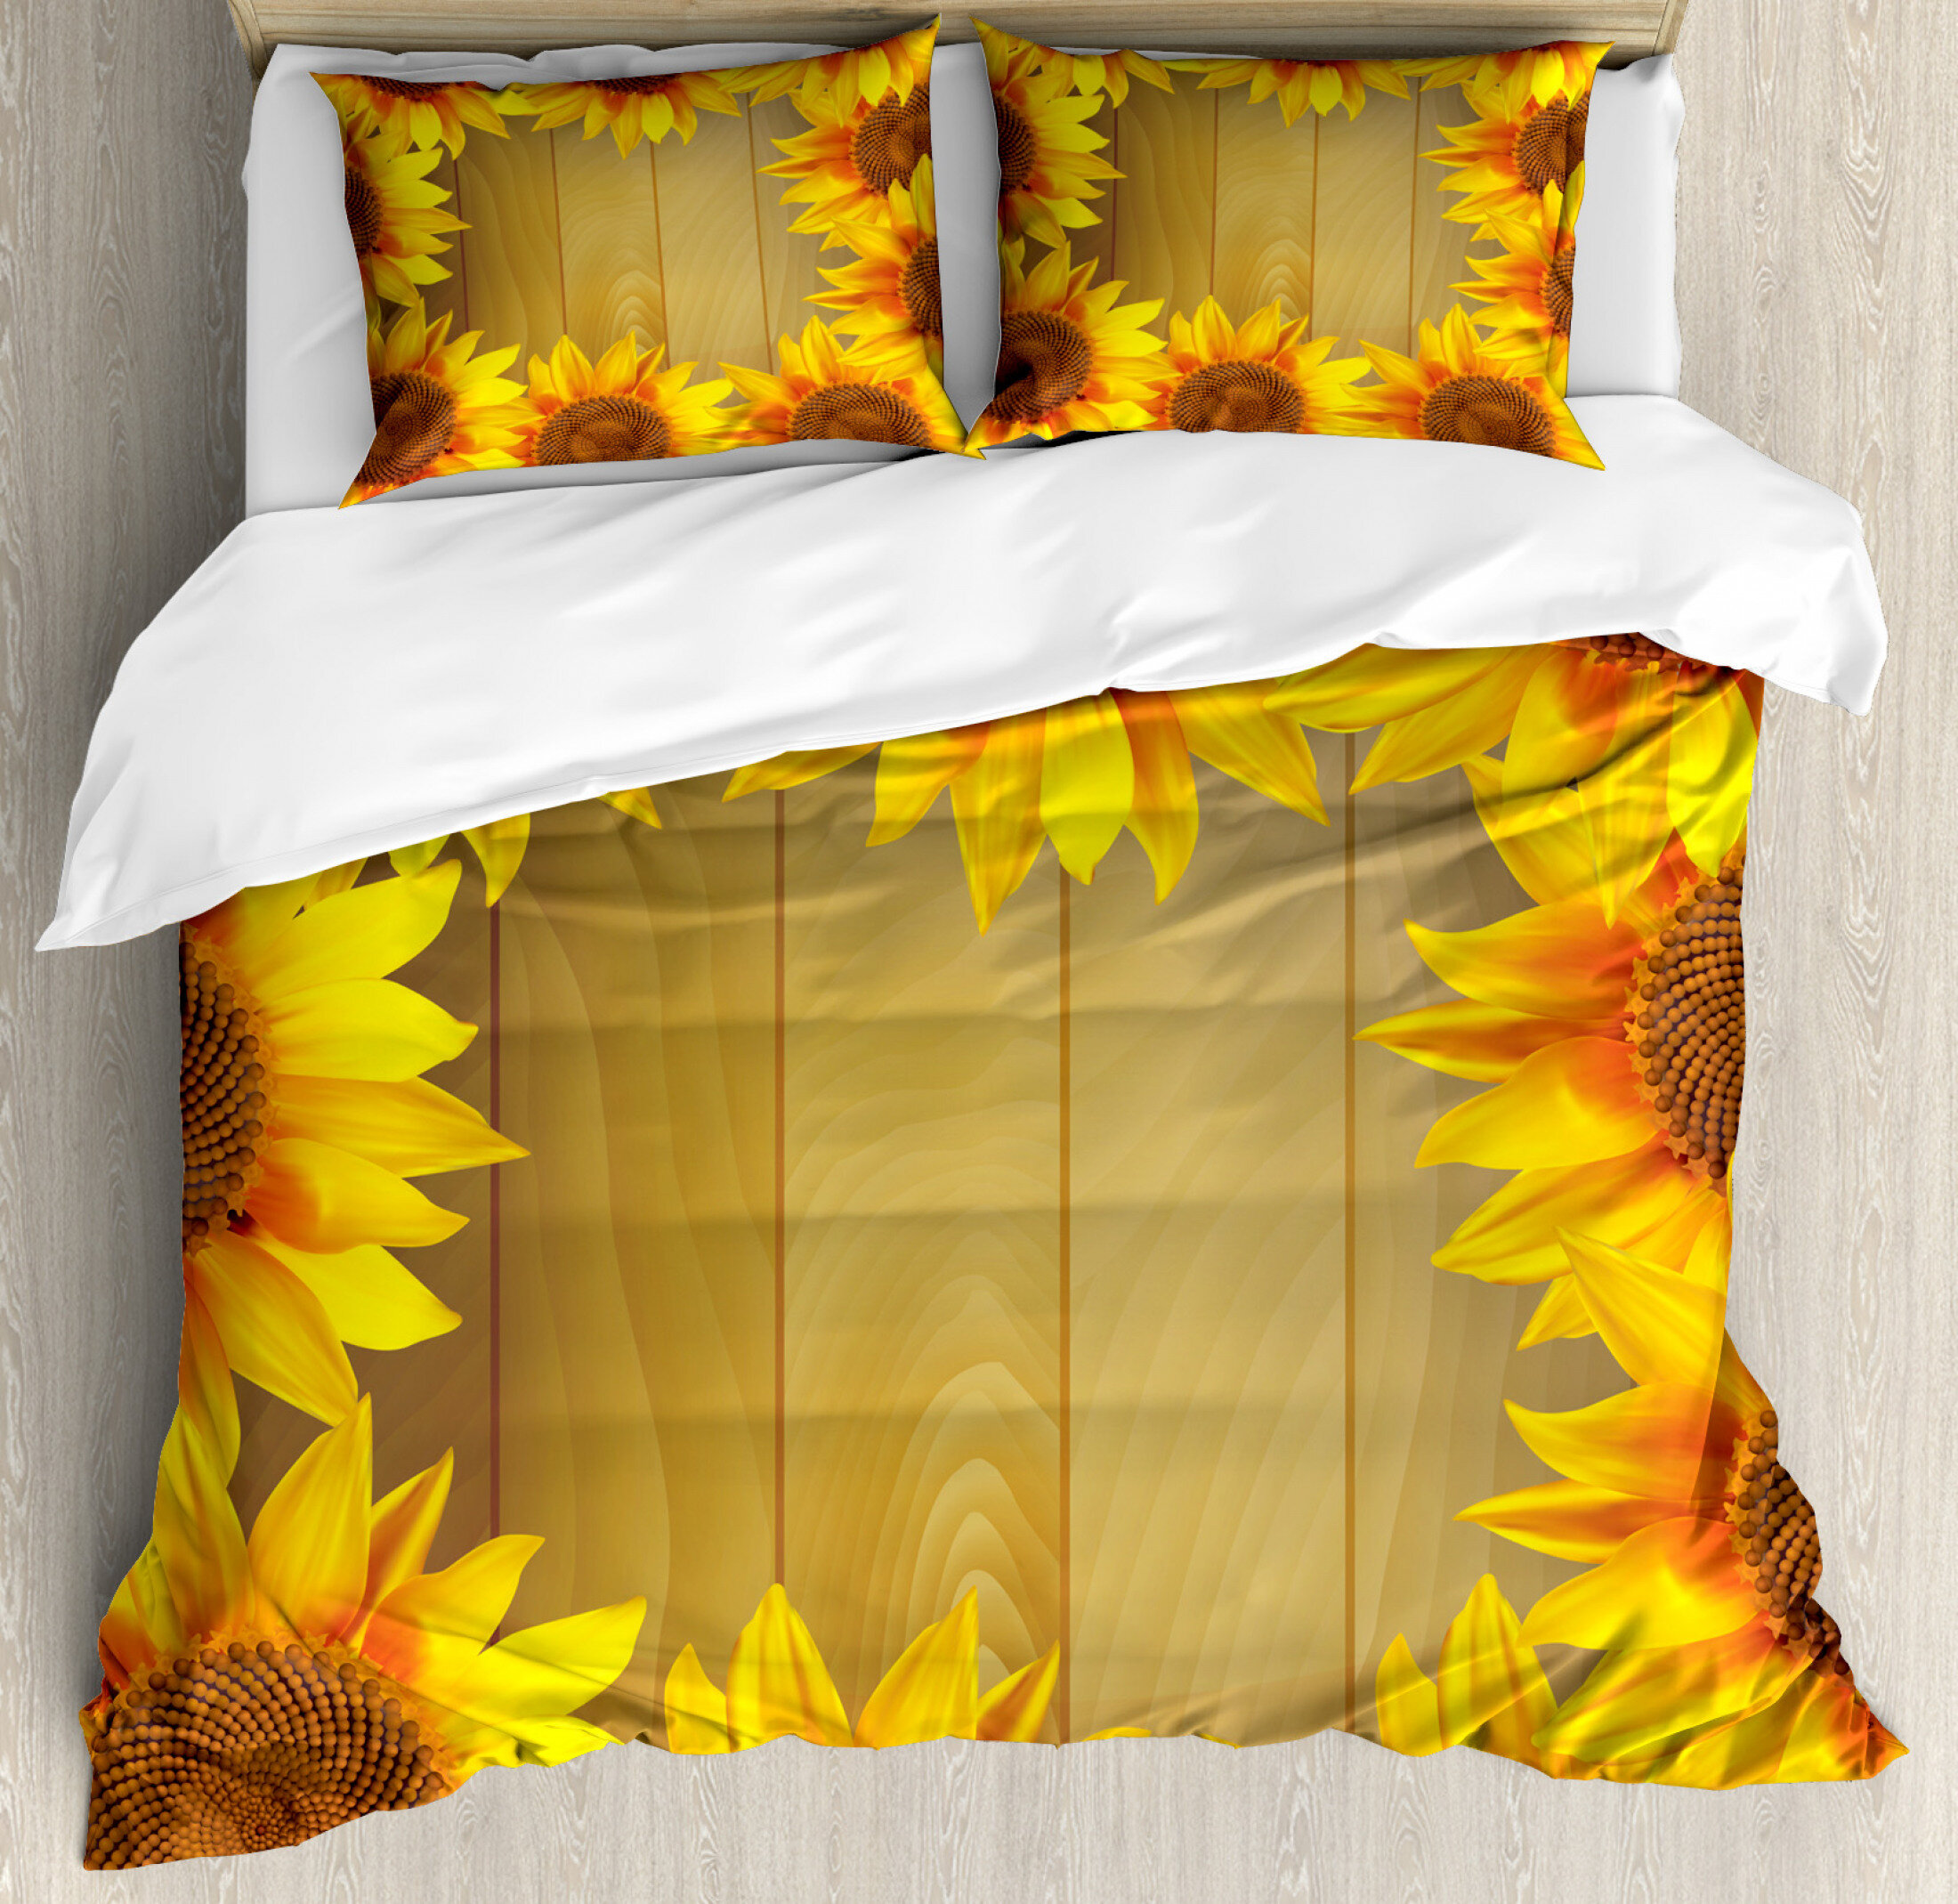 Cute Sunflower Field as Summer Background Happiness Colorful Nature Art Print Ambesonne Yellow Duvet Cover Set Queen Size Decorative 3 Piece Bedding Set with 2 Pillow Shams Orange Yellow 